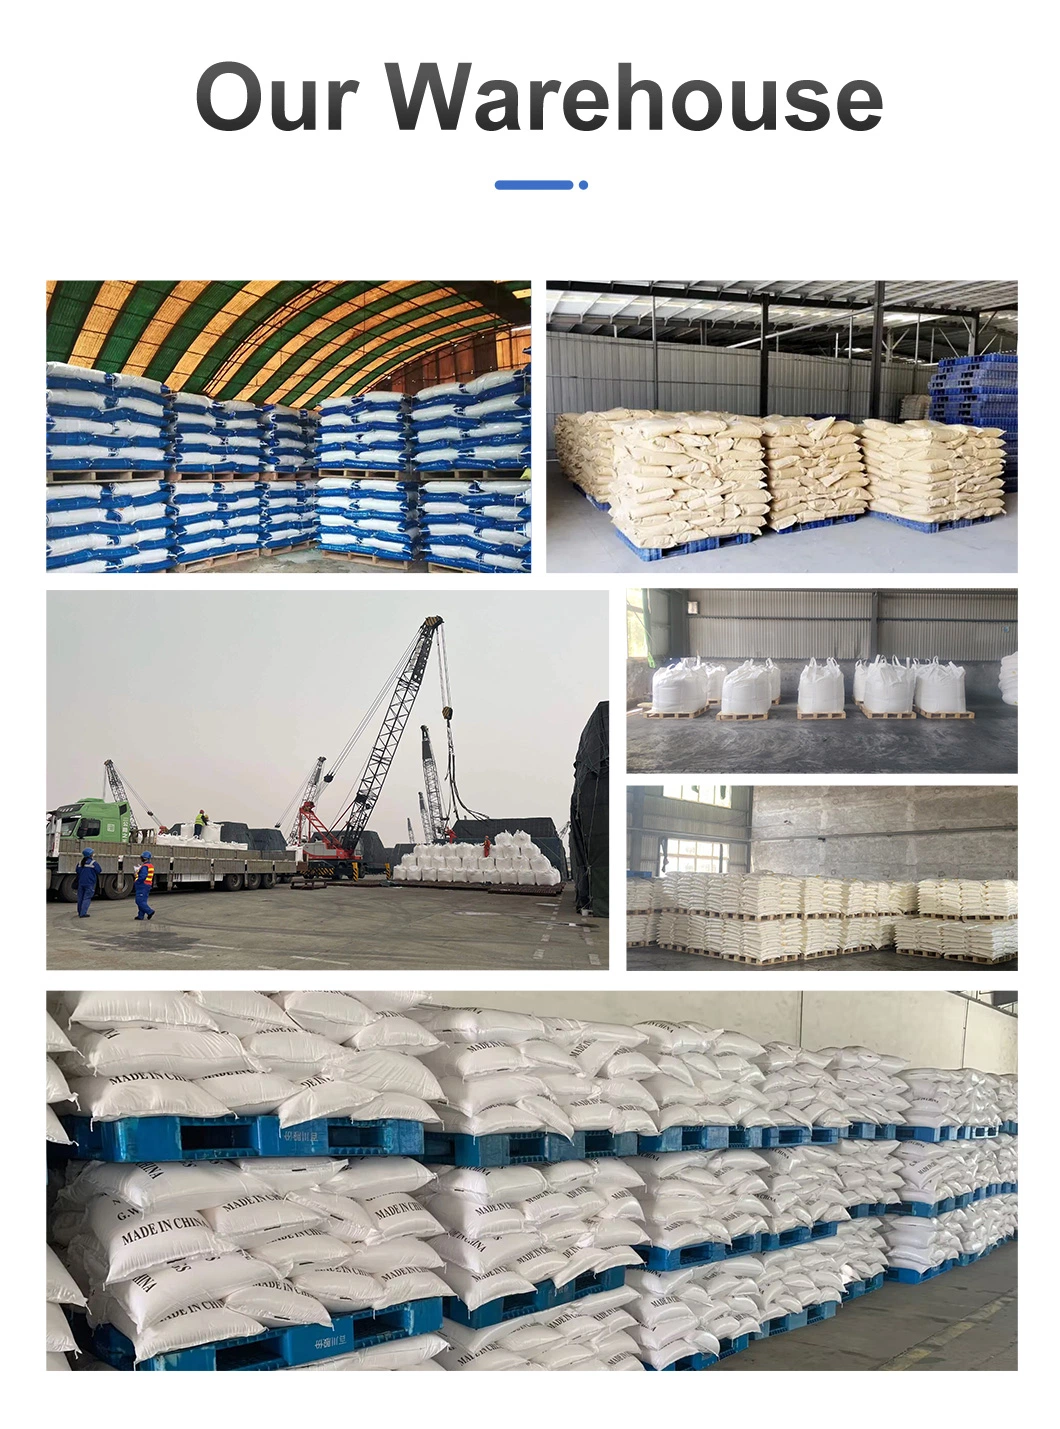 Best Price Calcium Formate for Feed Additive